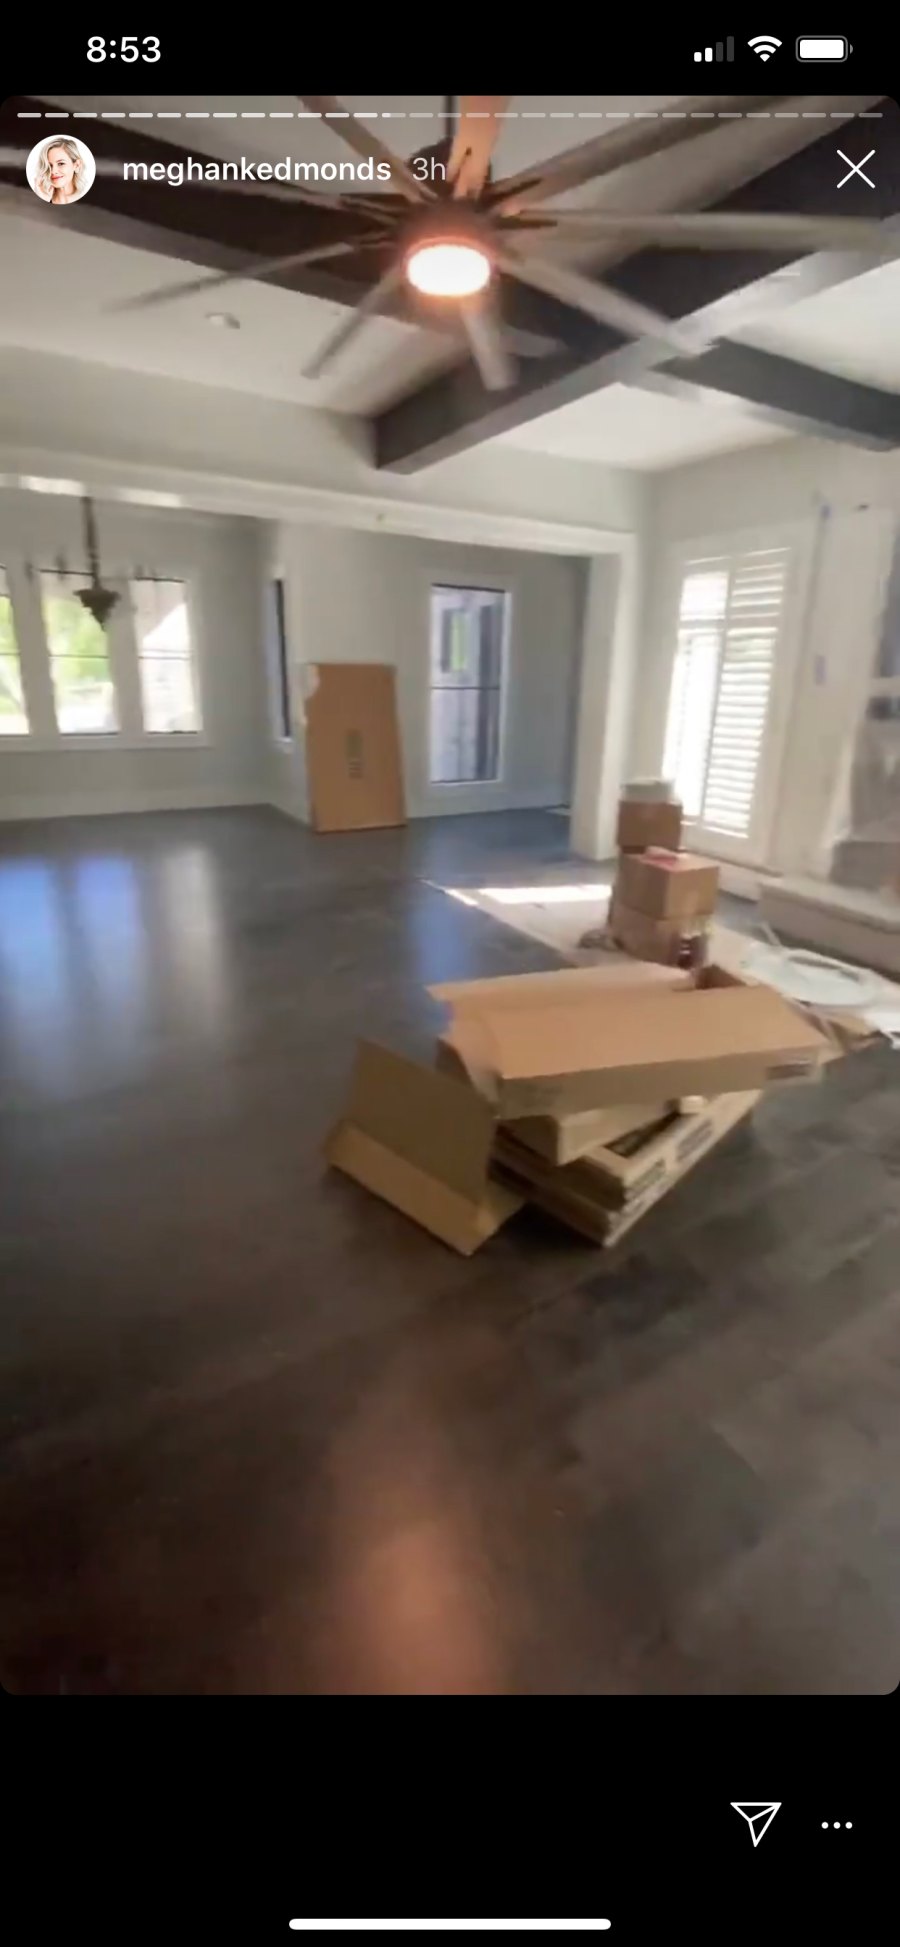 Meghan King Edmonds Shows Off Her New Home With a Bowling Alley and More